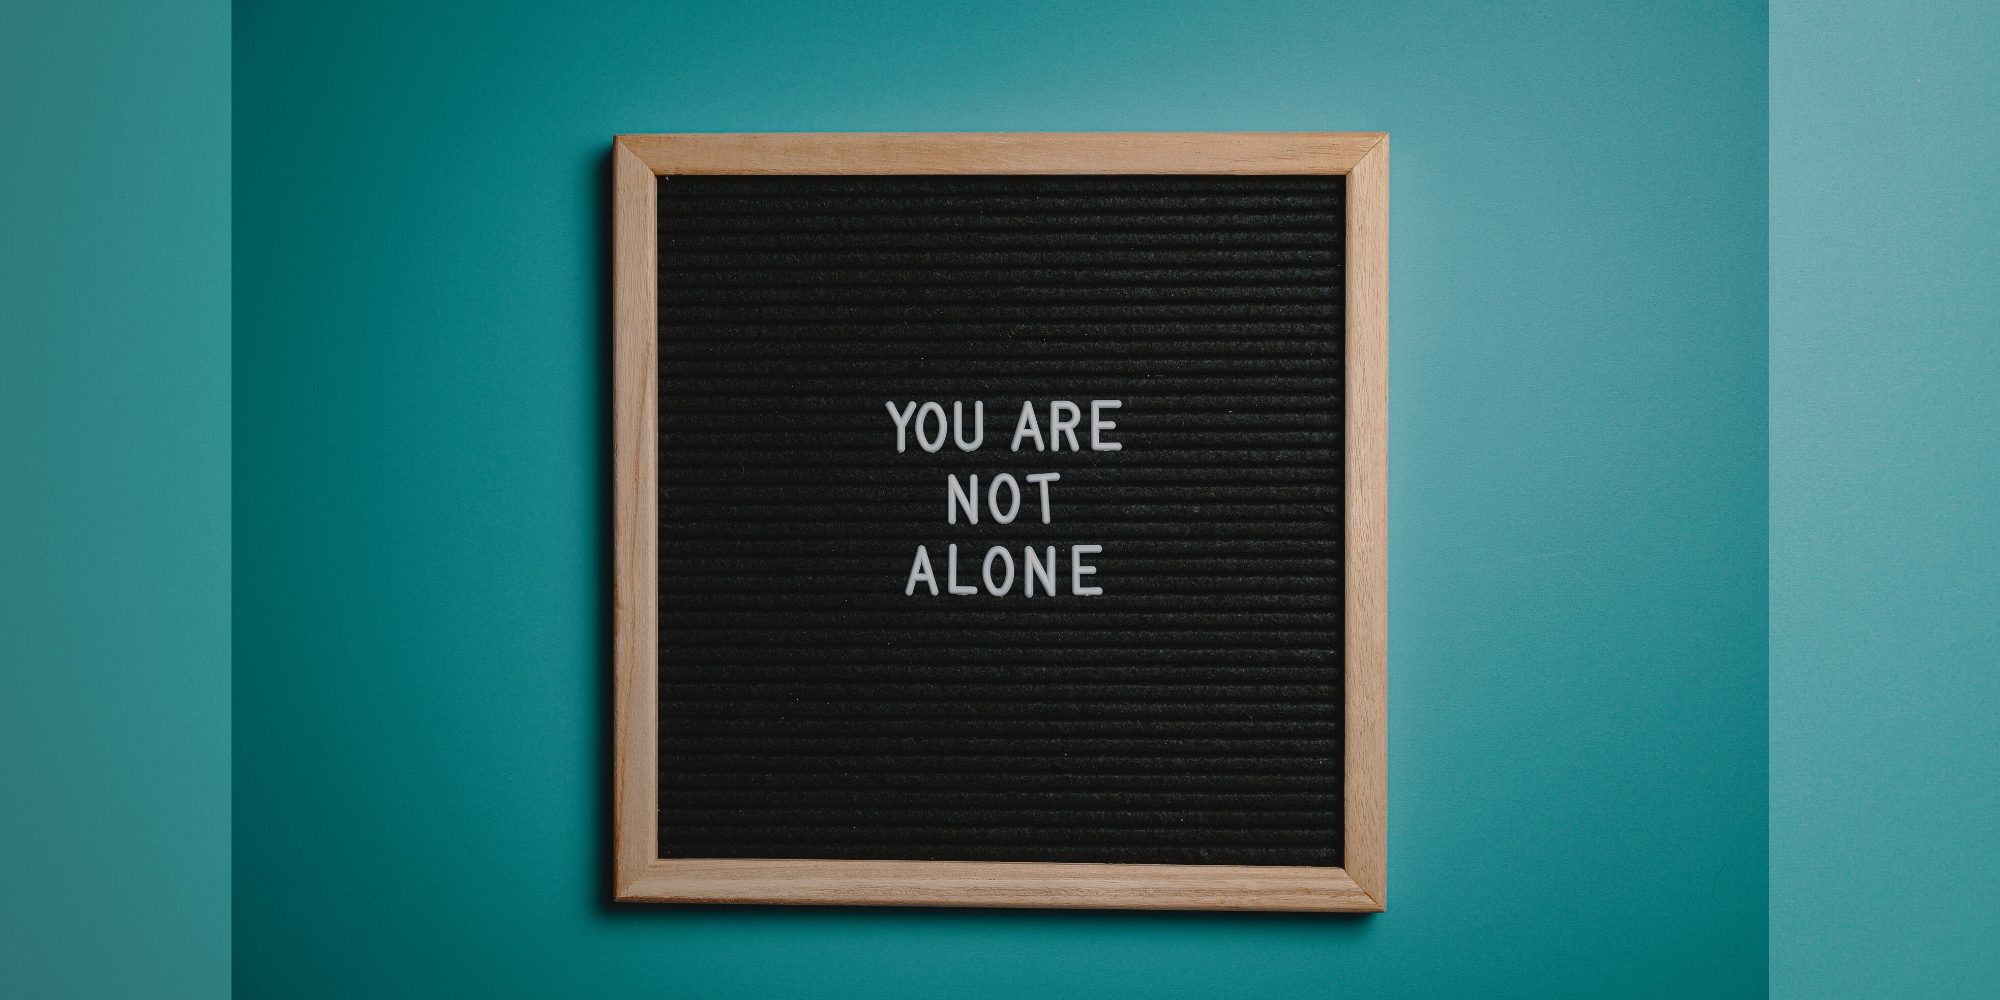 Letter board with text that reads "You Are Not Alone"